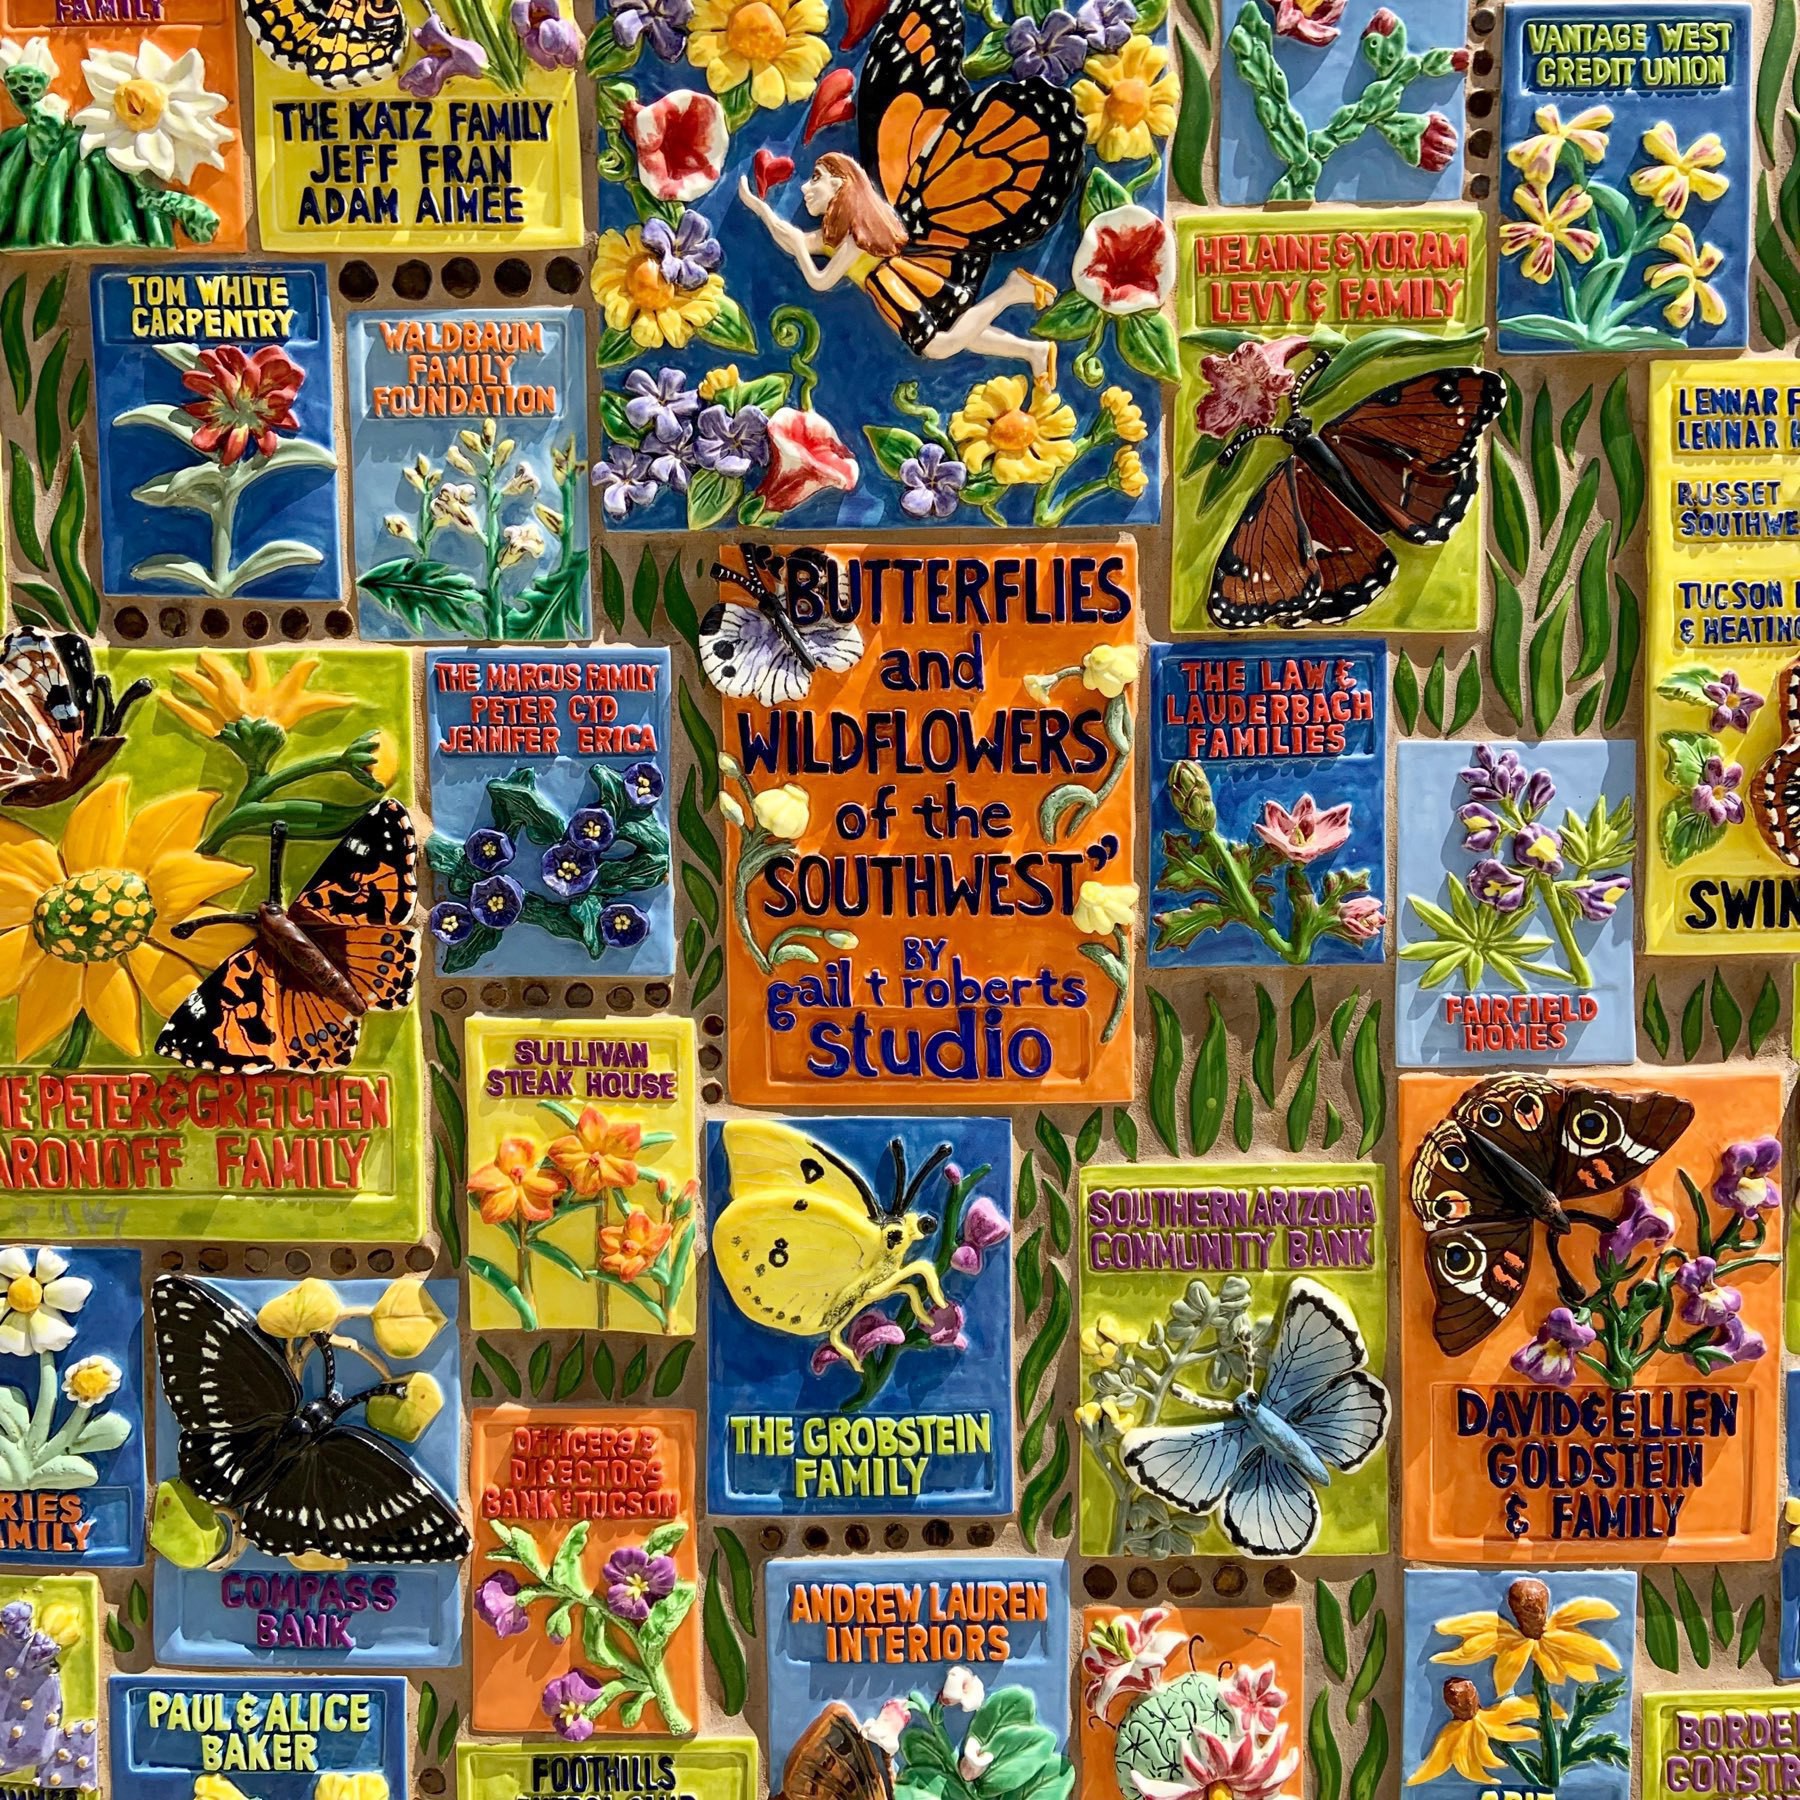 part of a mural by Gail Roberts celebrating the wildflowers and butterflies of the American Southwest